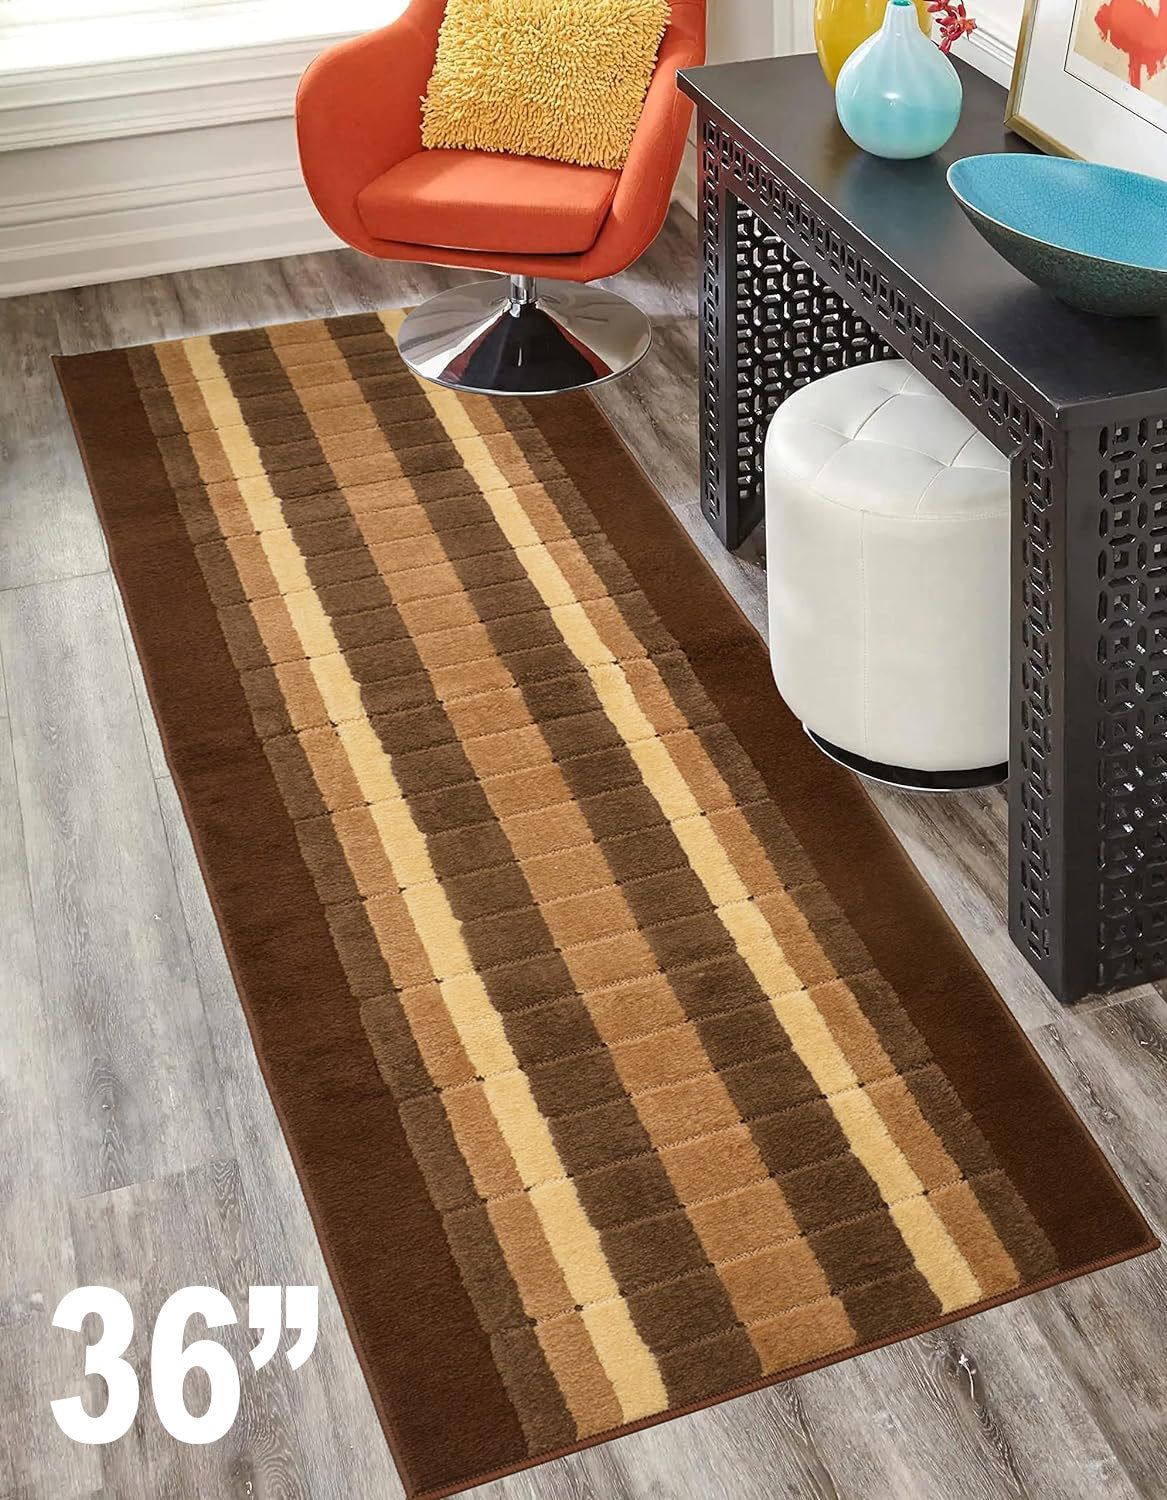 Machine Washable Custom Size Runner Rug Squares Geometric Brown Skid Resistant Runner Rug  Customize Up to 50 Feet and 36 Inch Width Runner Rug